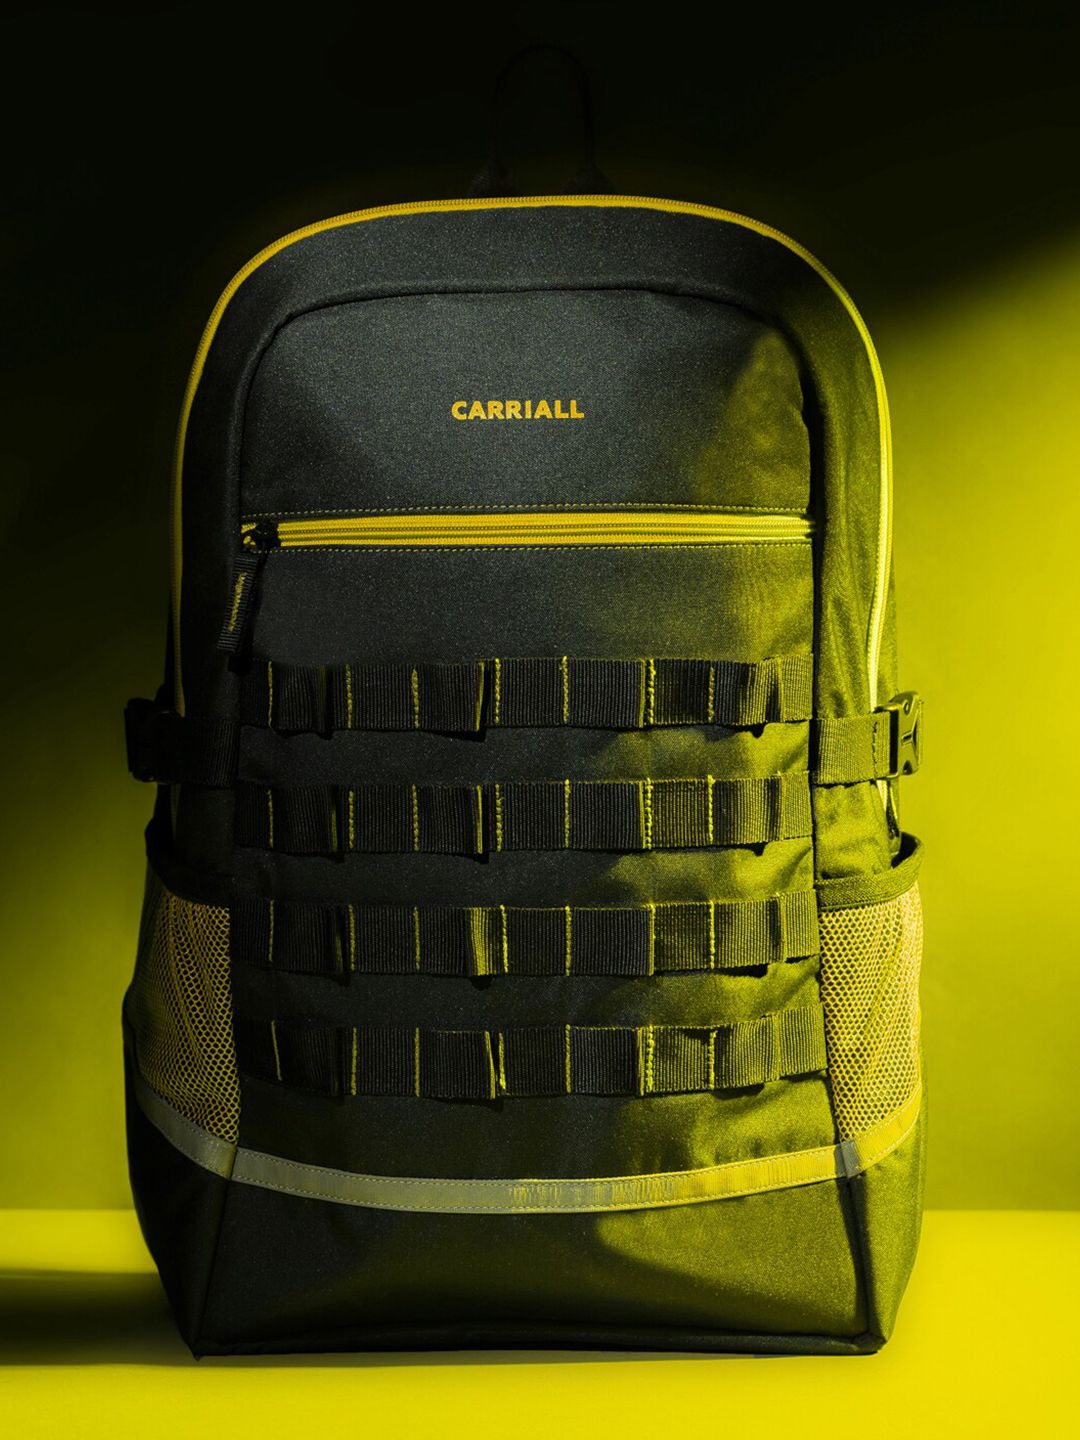 CARRIALL Unisex Black & Yellow Colourblocked AXEL Backpack with Reflective Strip Price in India